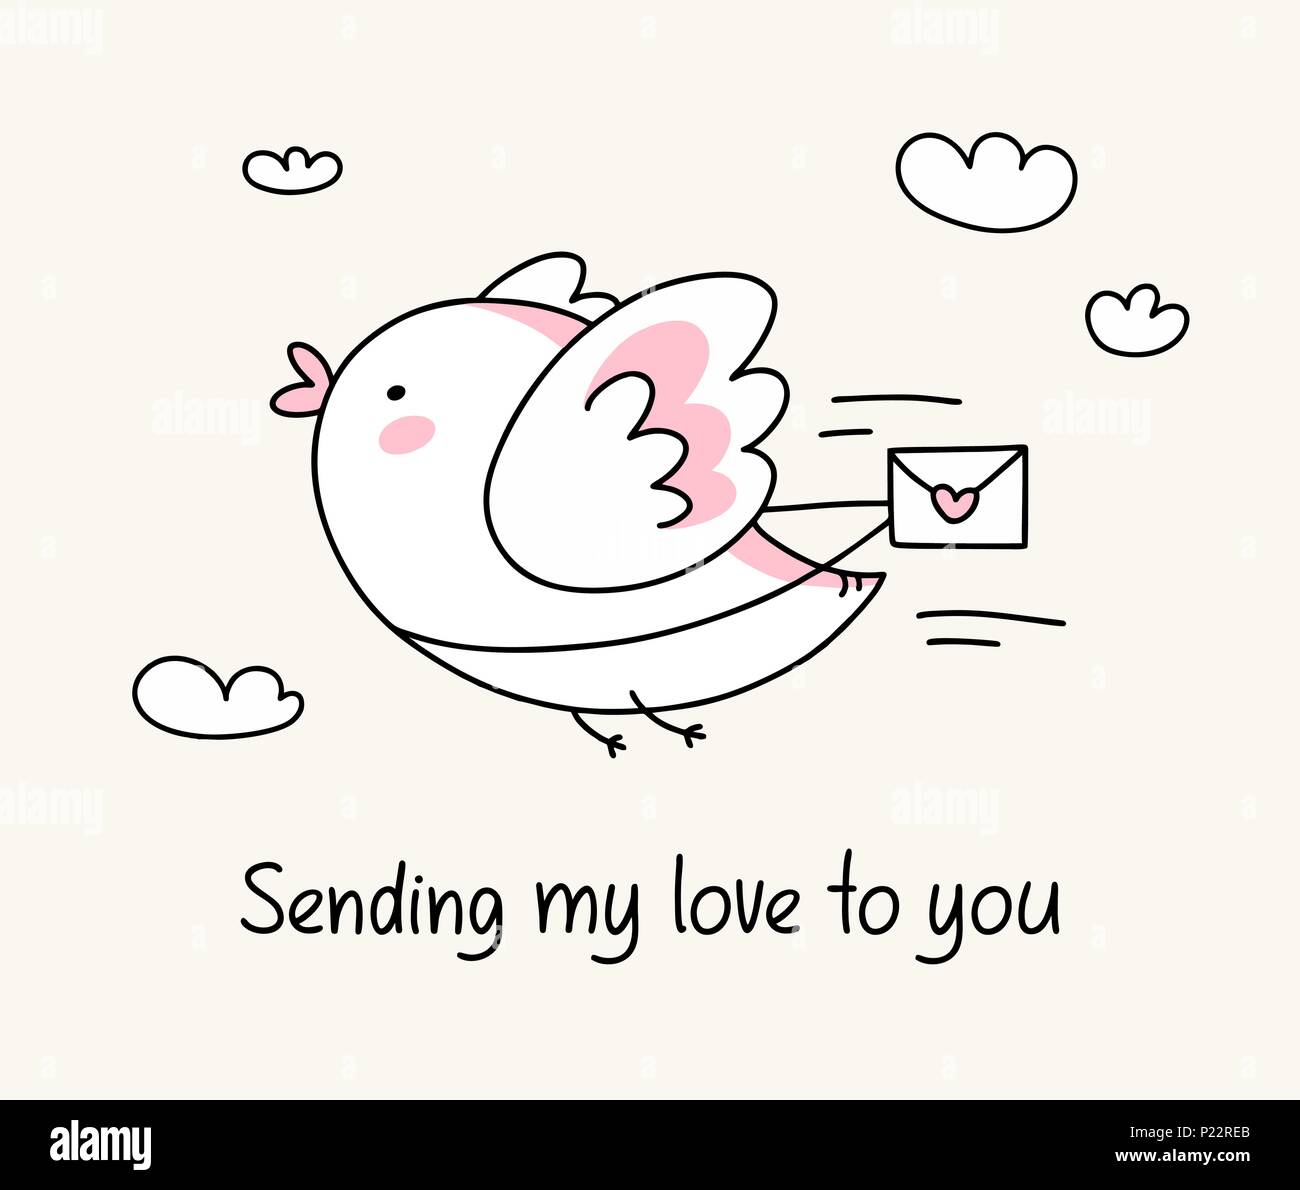 Sending my love to you greeting card with funny bird with love letter. Happy Valentine`s Day love cartoon illustration card Stock Vector